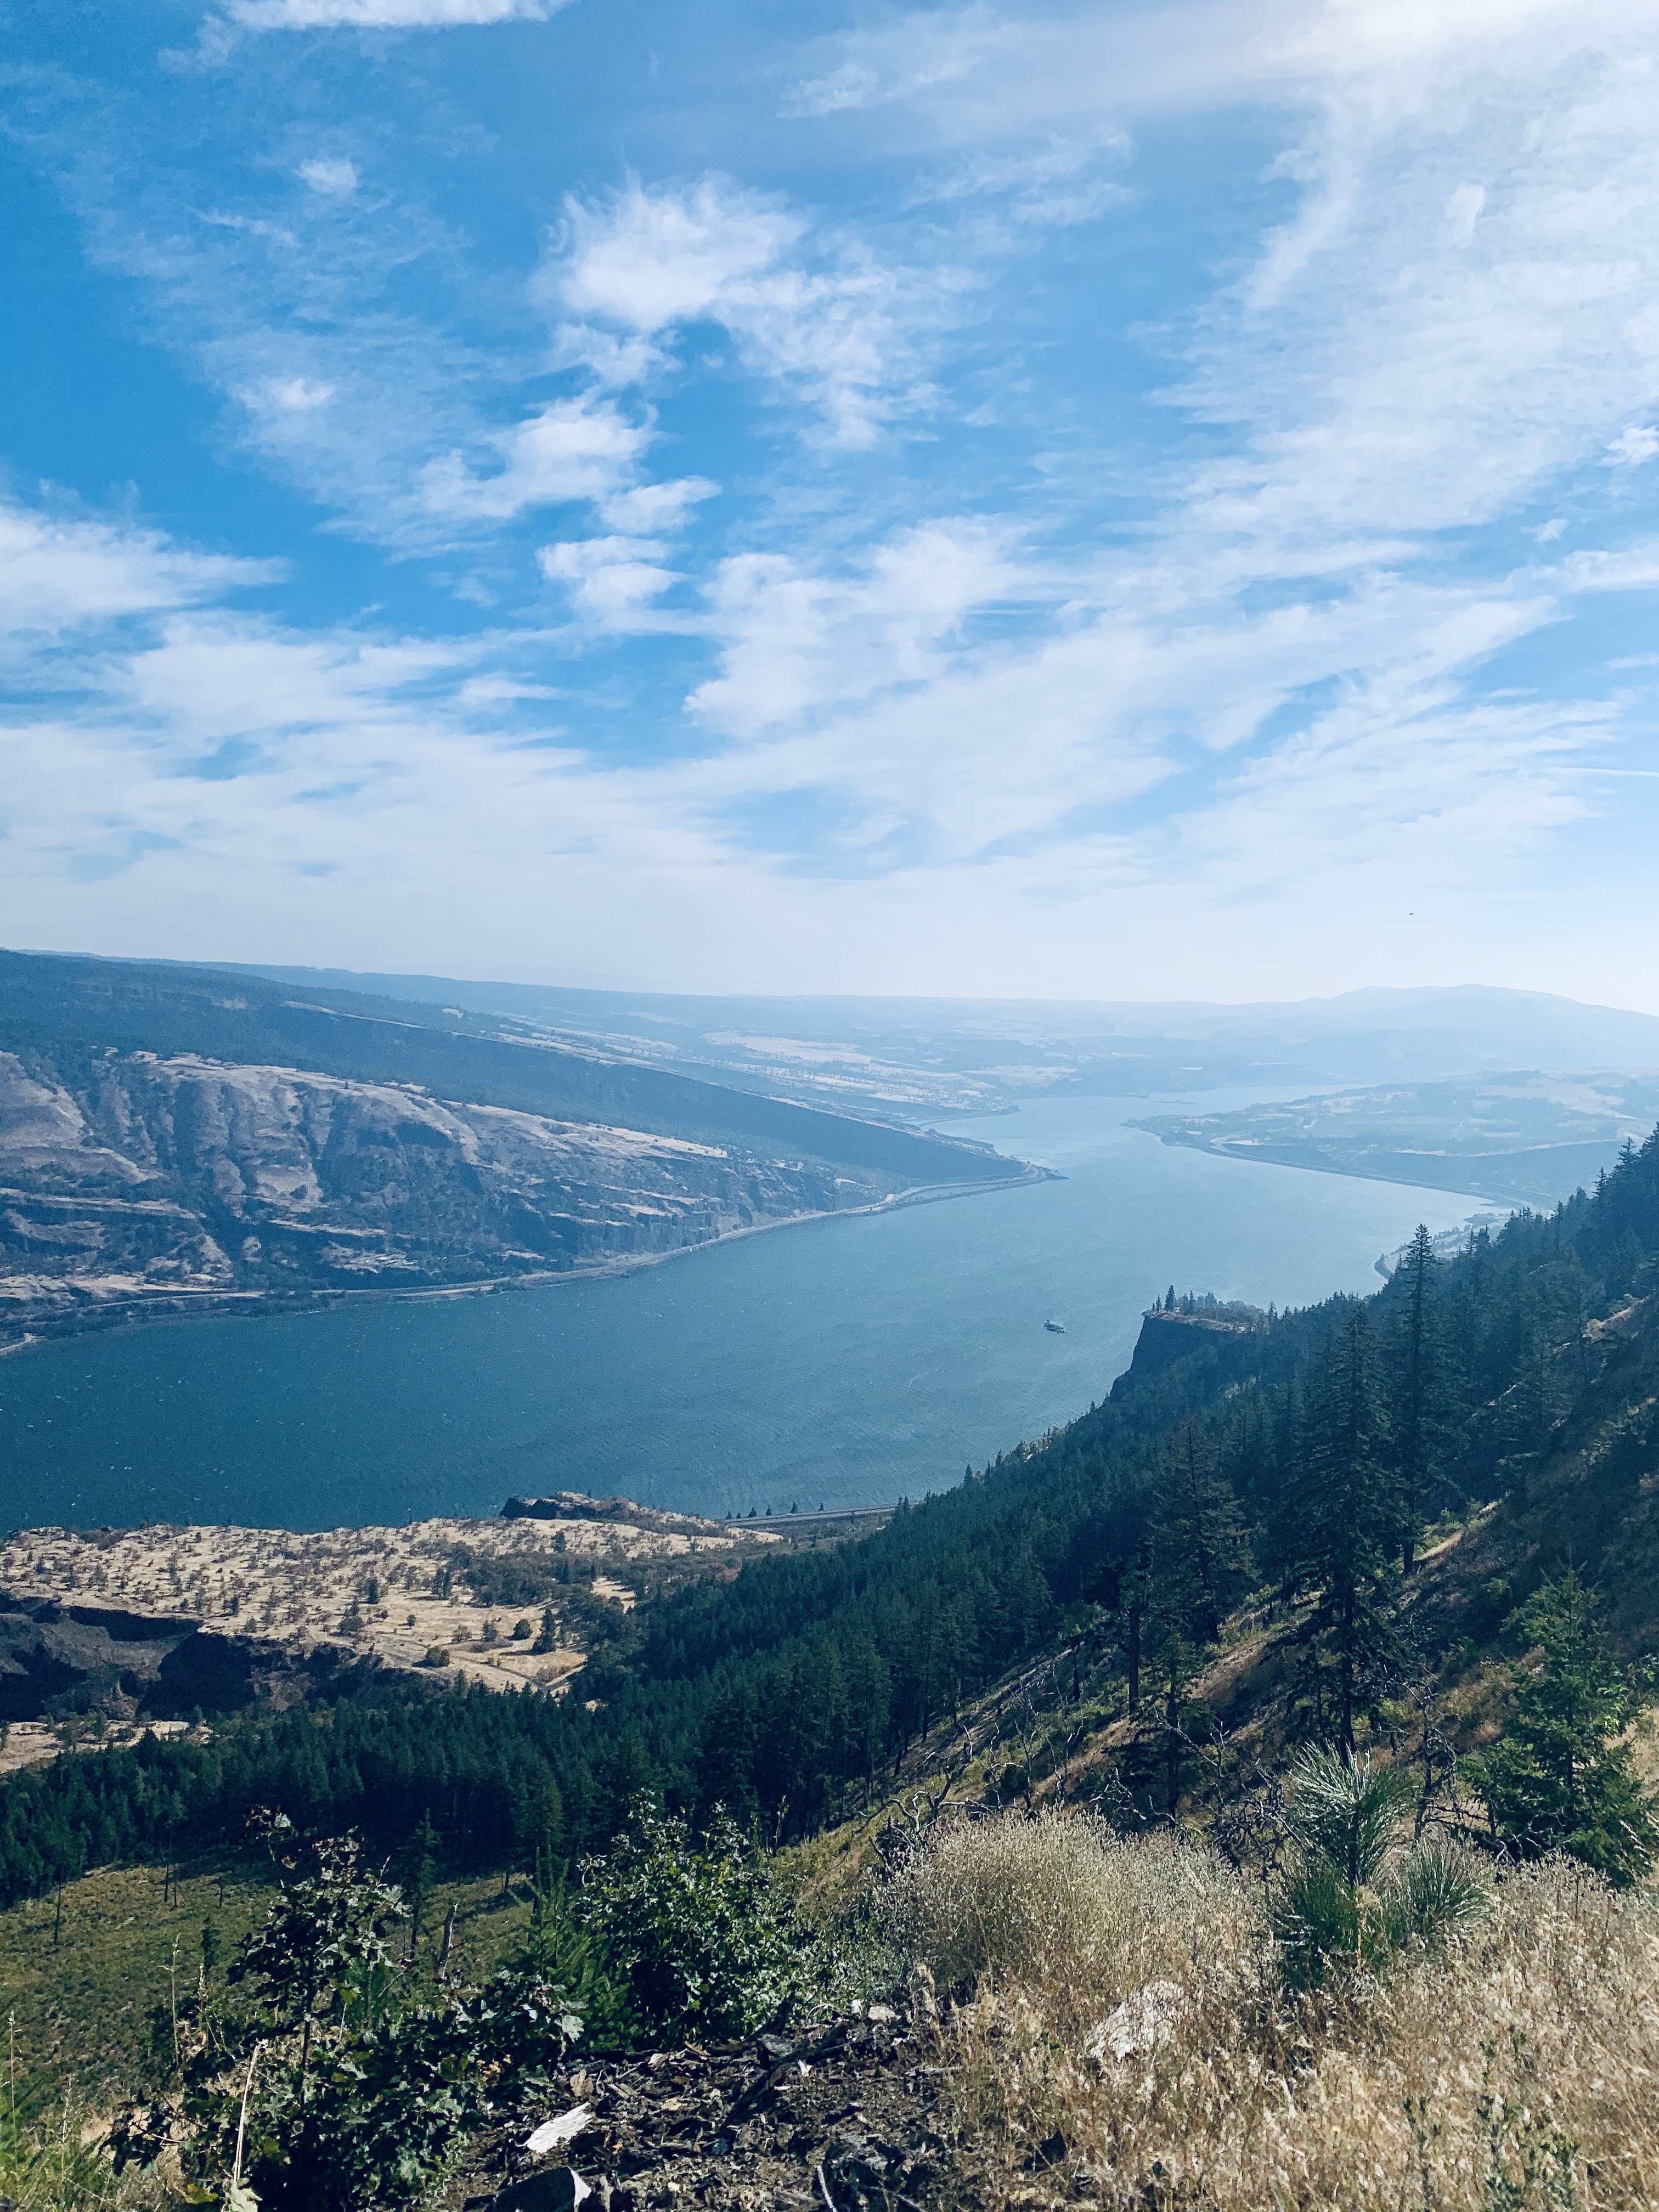 Hiking in the Columbia River Gorge